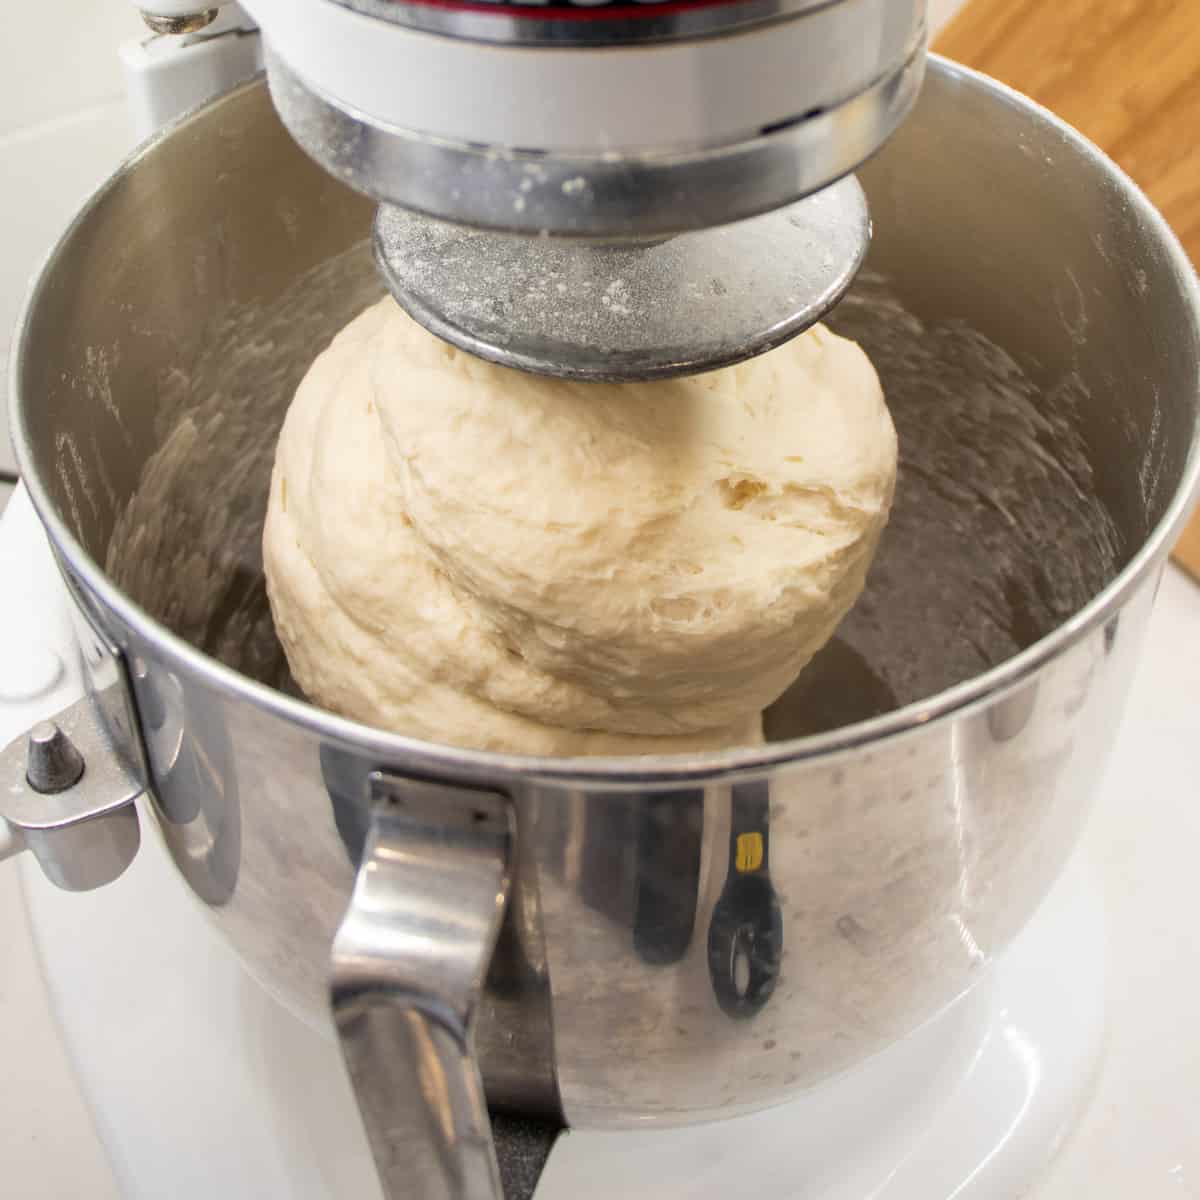 Kneaded dough in the stand mixer bowl.